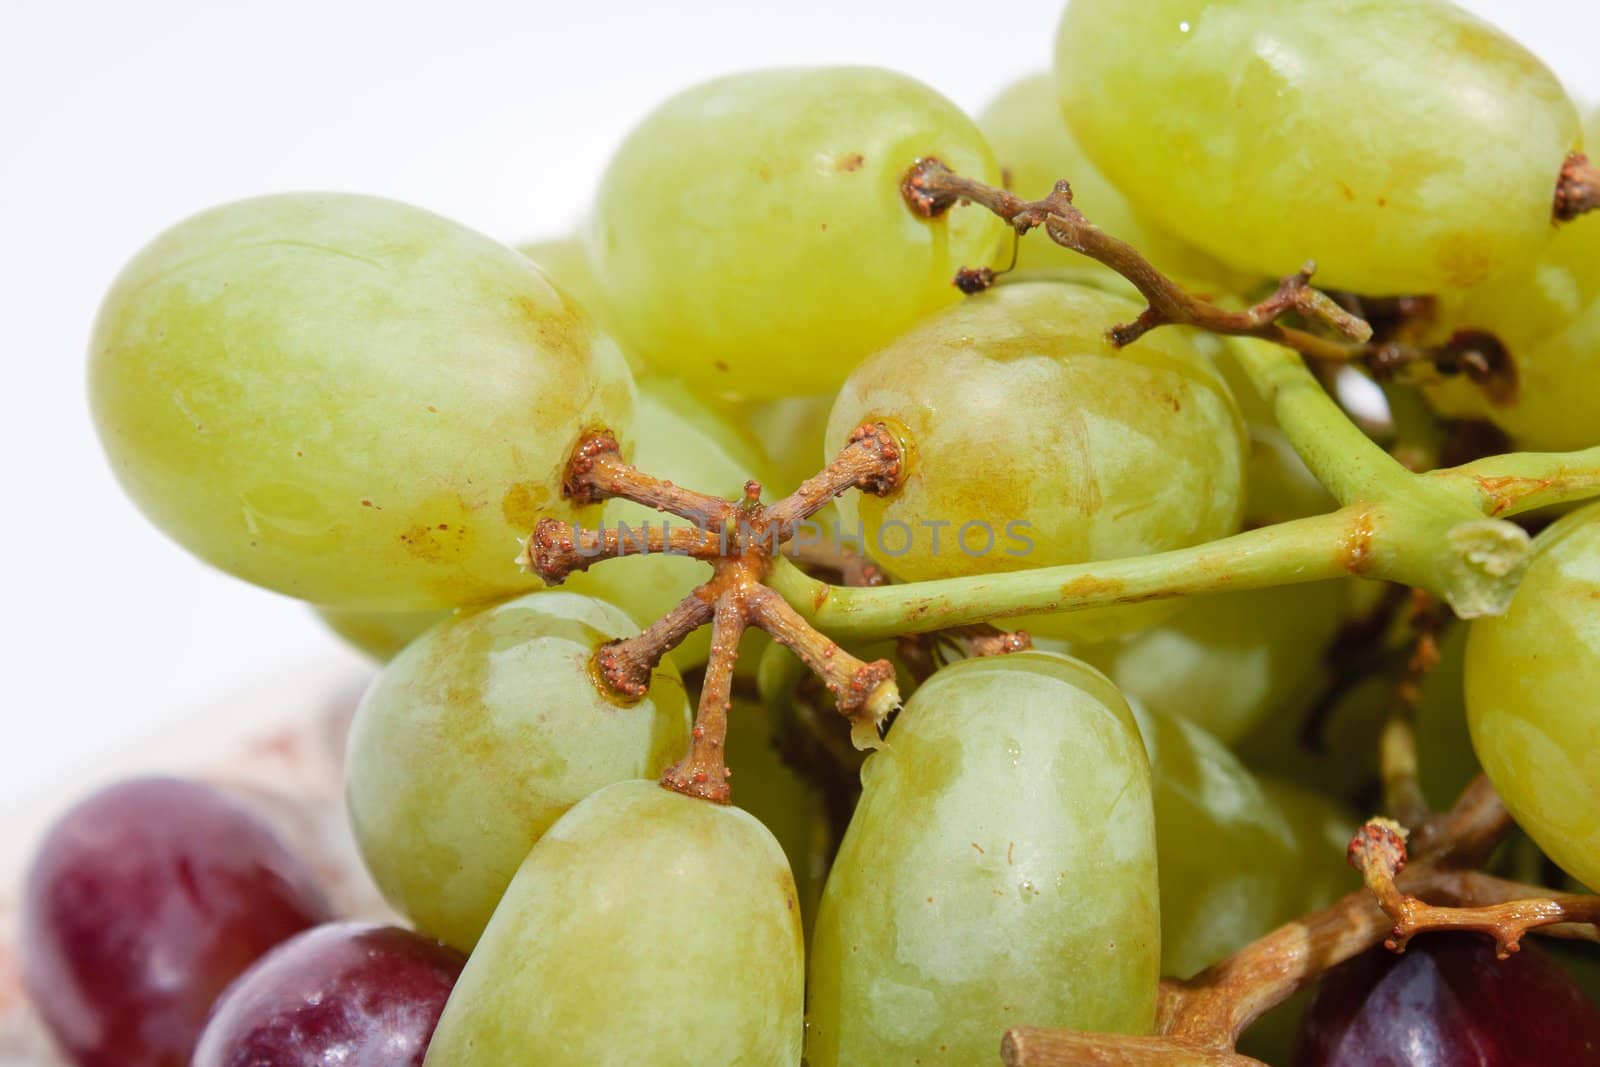 Grape, green and red grapes. Arranged on the plate insert. On a white background.